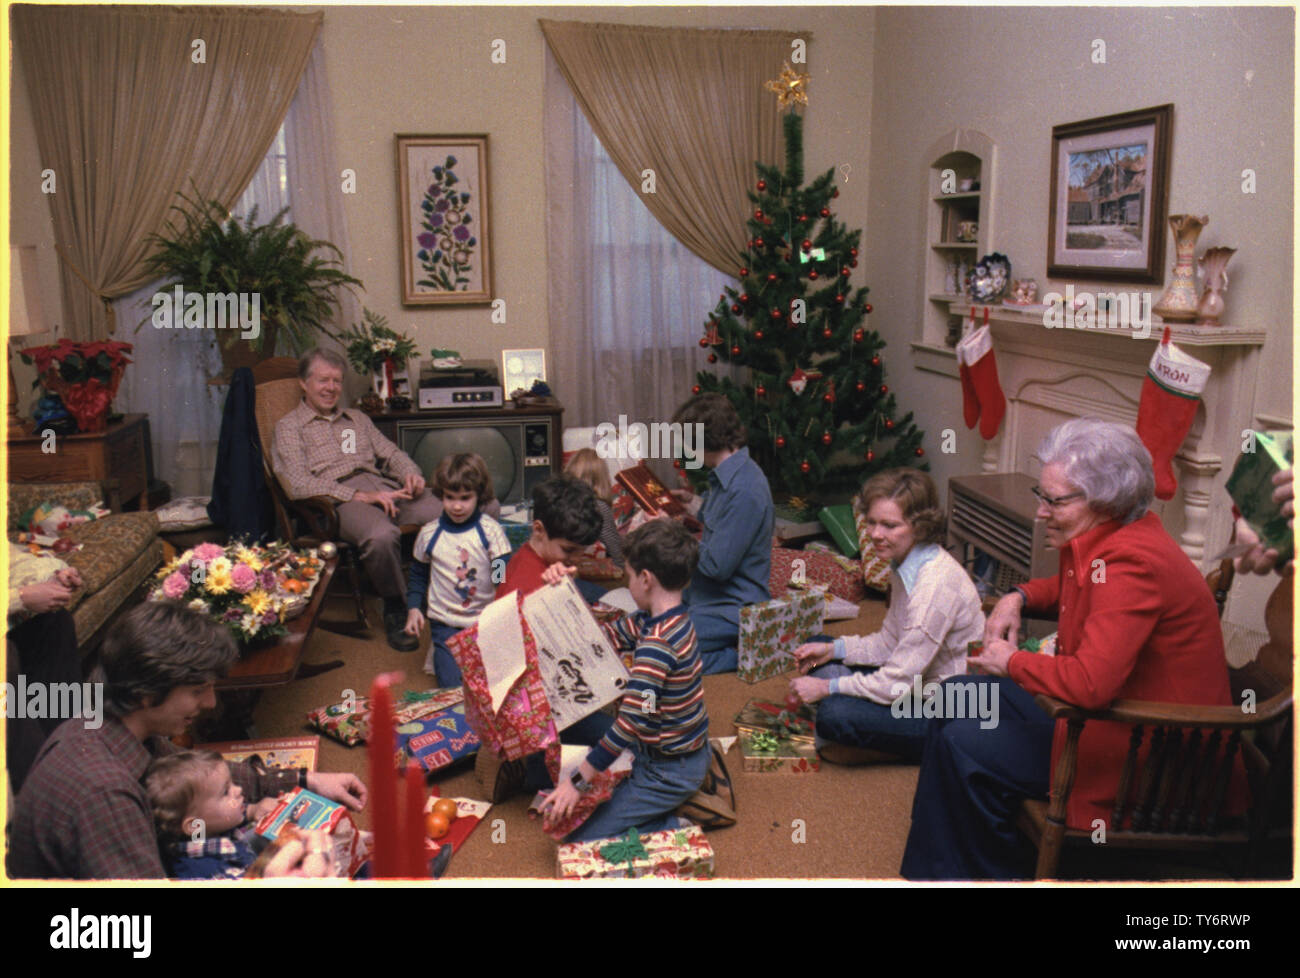 Jimmy Carter and family celebrate Christmas at home Stock Photo